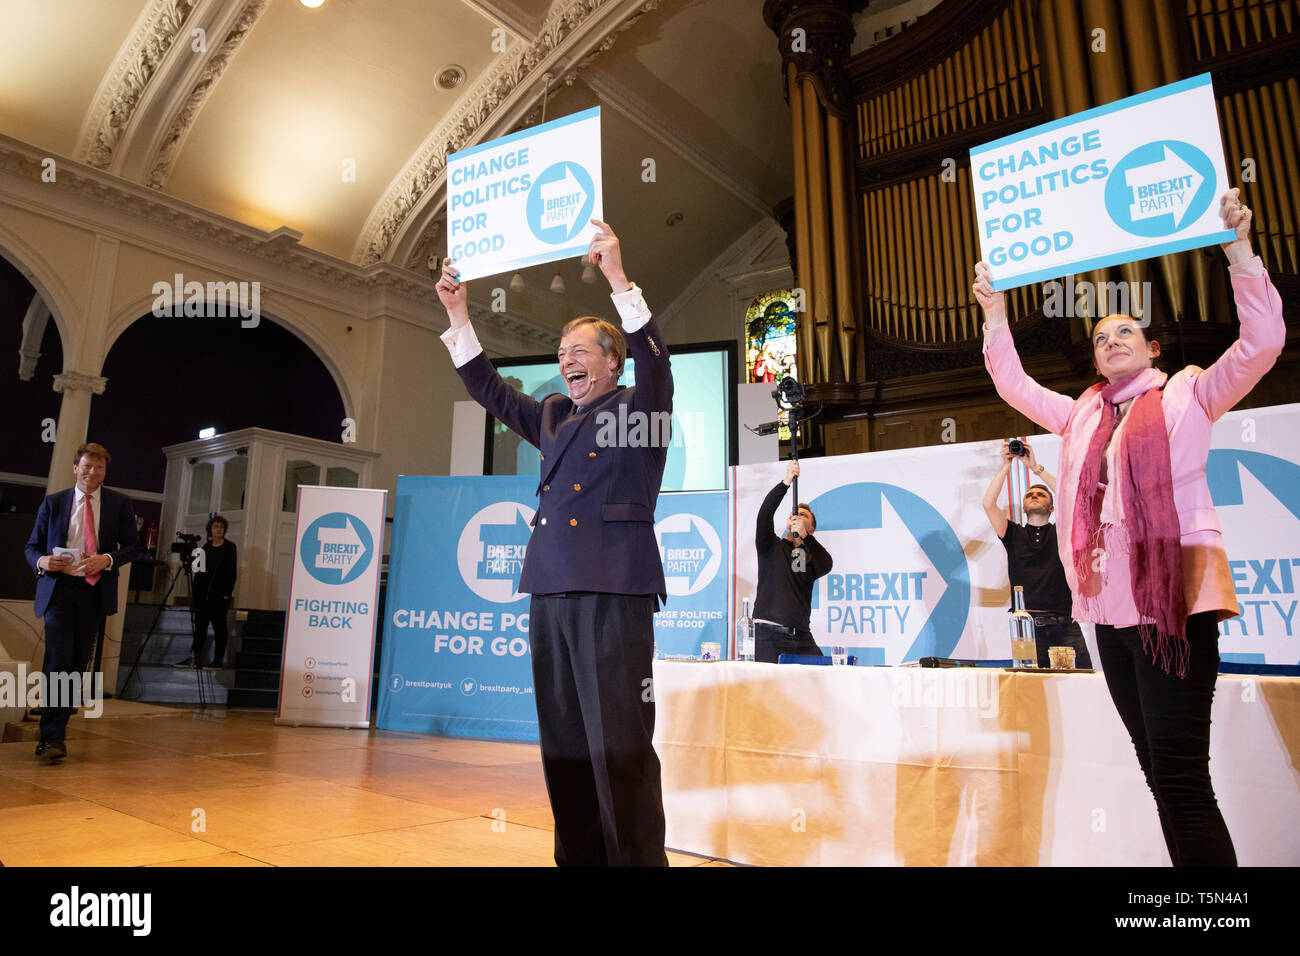 Brexit Party Rally held at Albert Hall Conference Centre, Nottingham. Nigel Farage joined by Annunziata Rees-Mogg, Richard Tice. Stock Photo